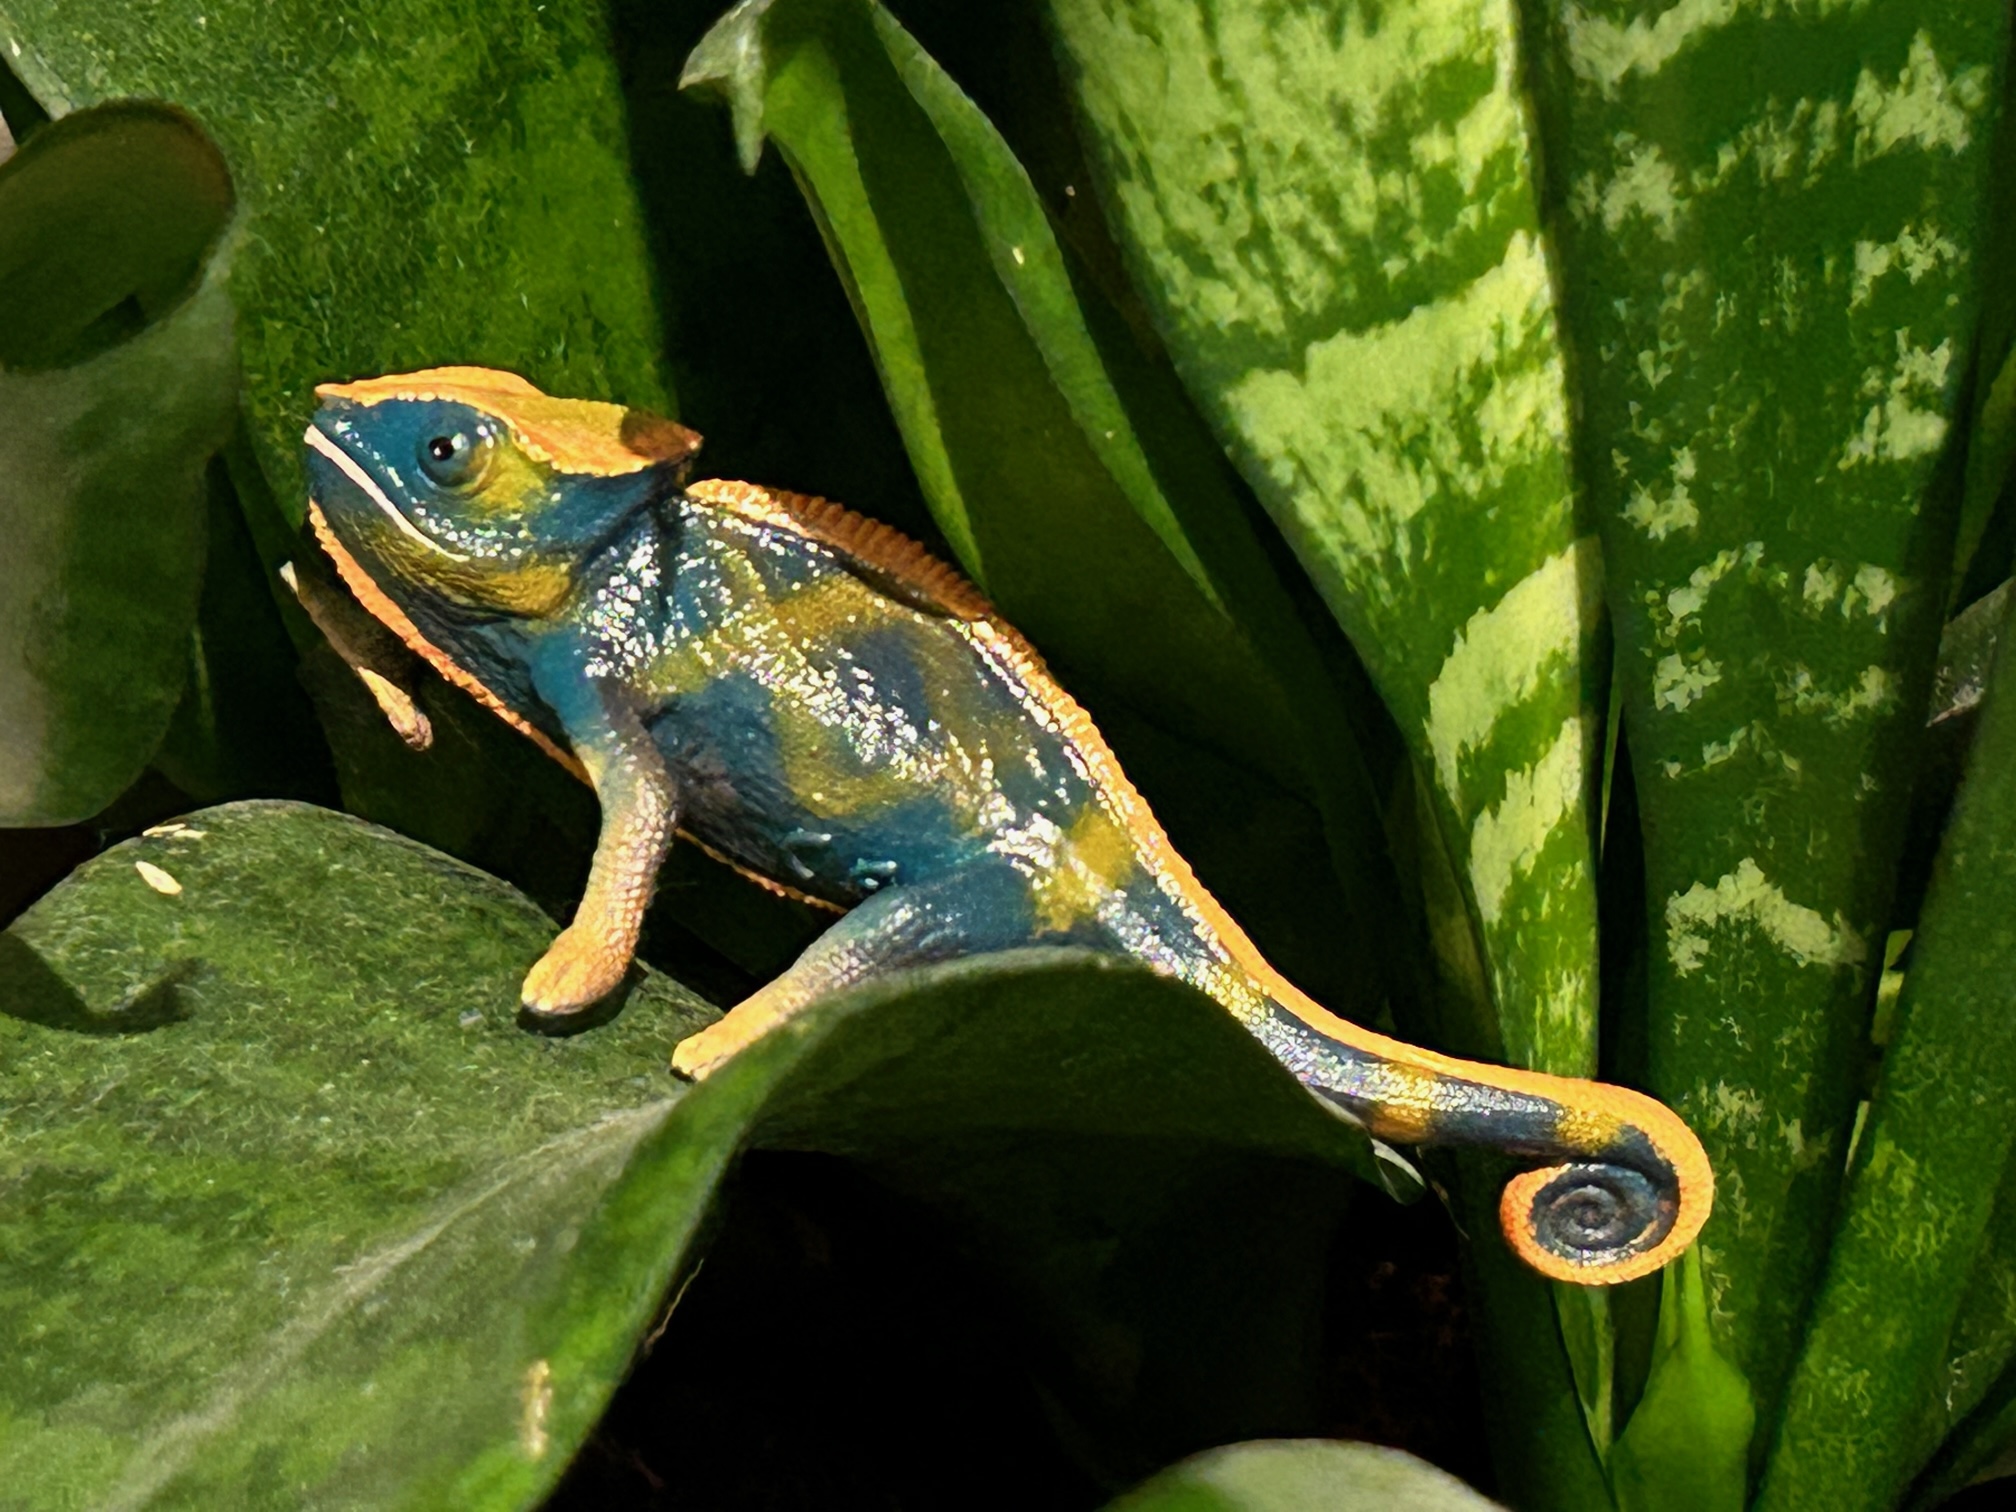 Some spot color: Meet the world's tiniest chameleon